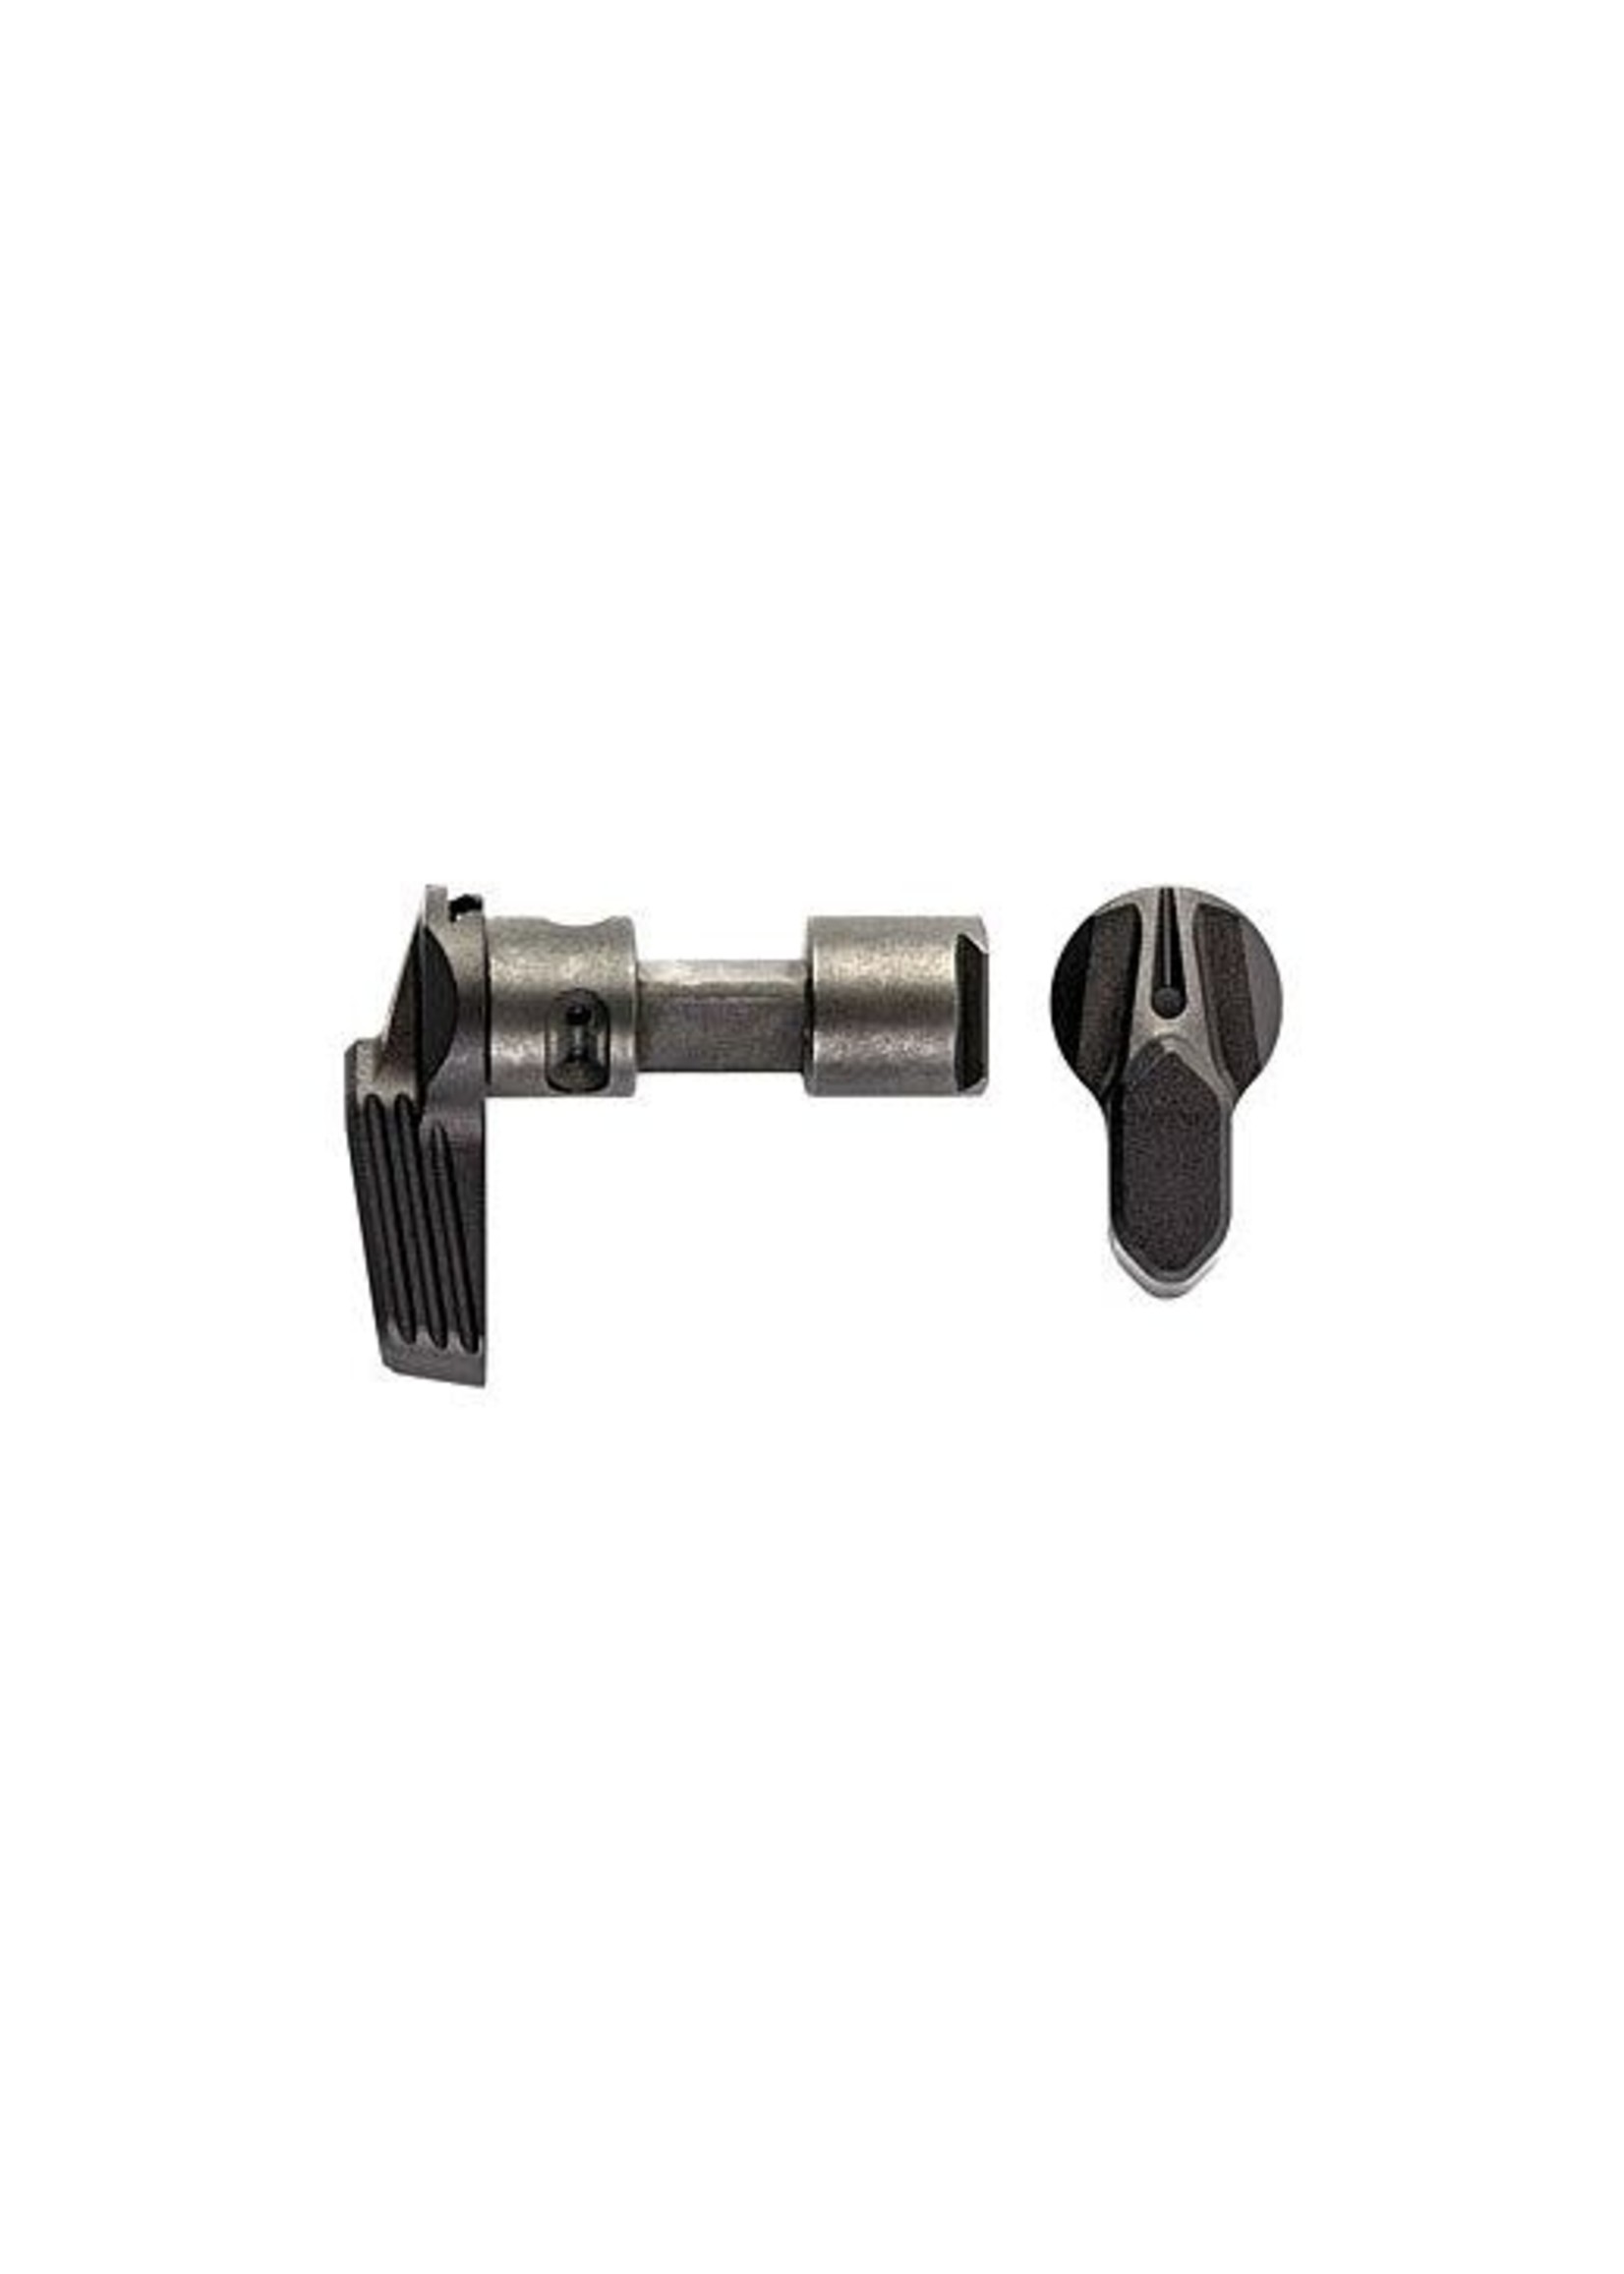 Radian Weapons Radian Weapons Talon Safety Selector 2-Lever, Black, for AR15